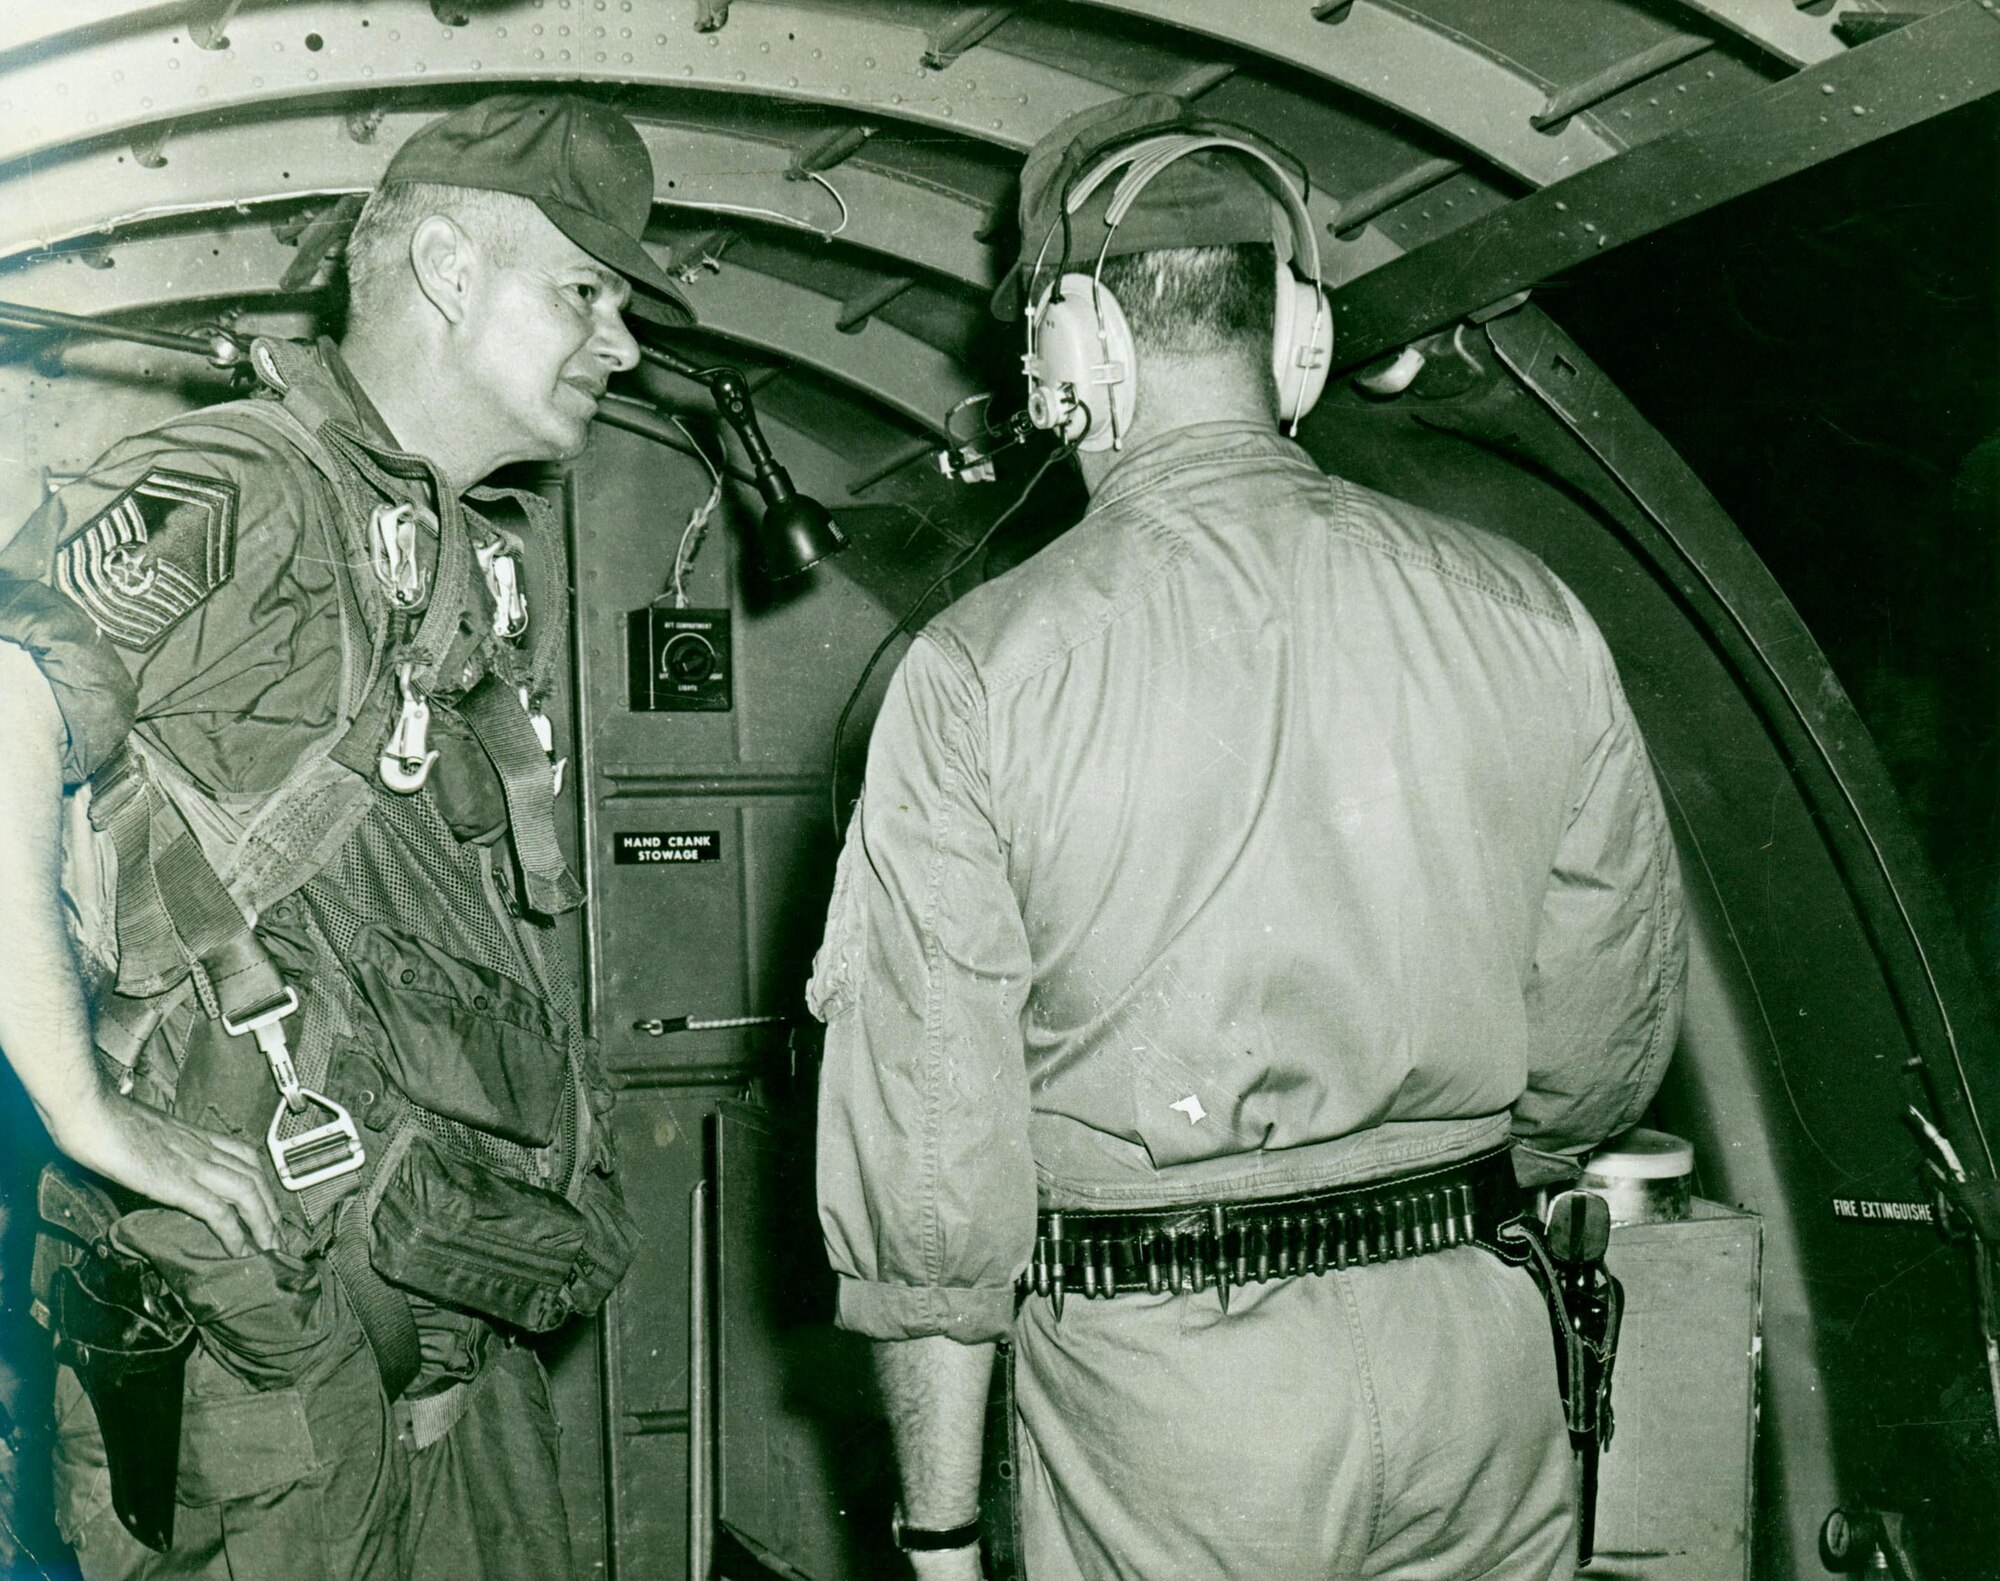 Chief Master Sgt. Paul Airey was selected as the first chief master sergeant of the Air Force on April 3, 1967.  During his tenure he visited many bases and talked with many Airmen about improving conditions for the enlisted force.  (U.S. Air Force file photo)